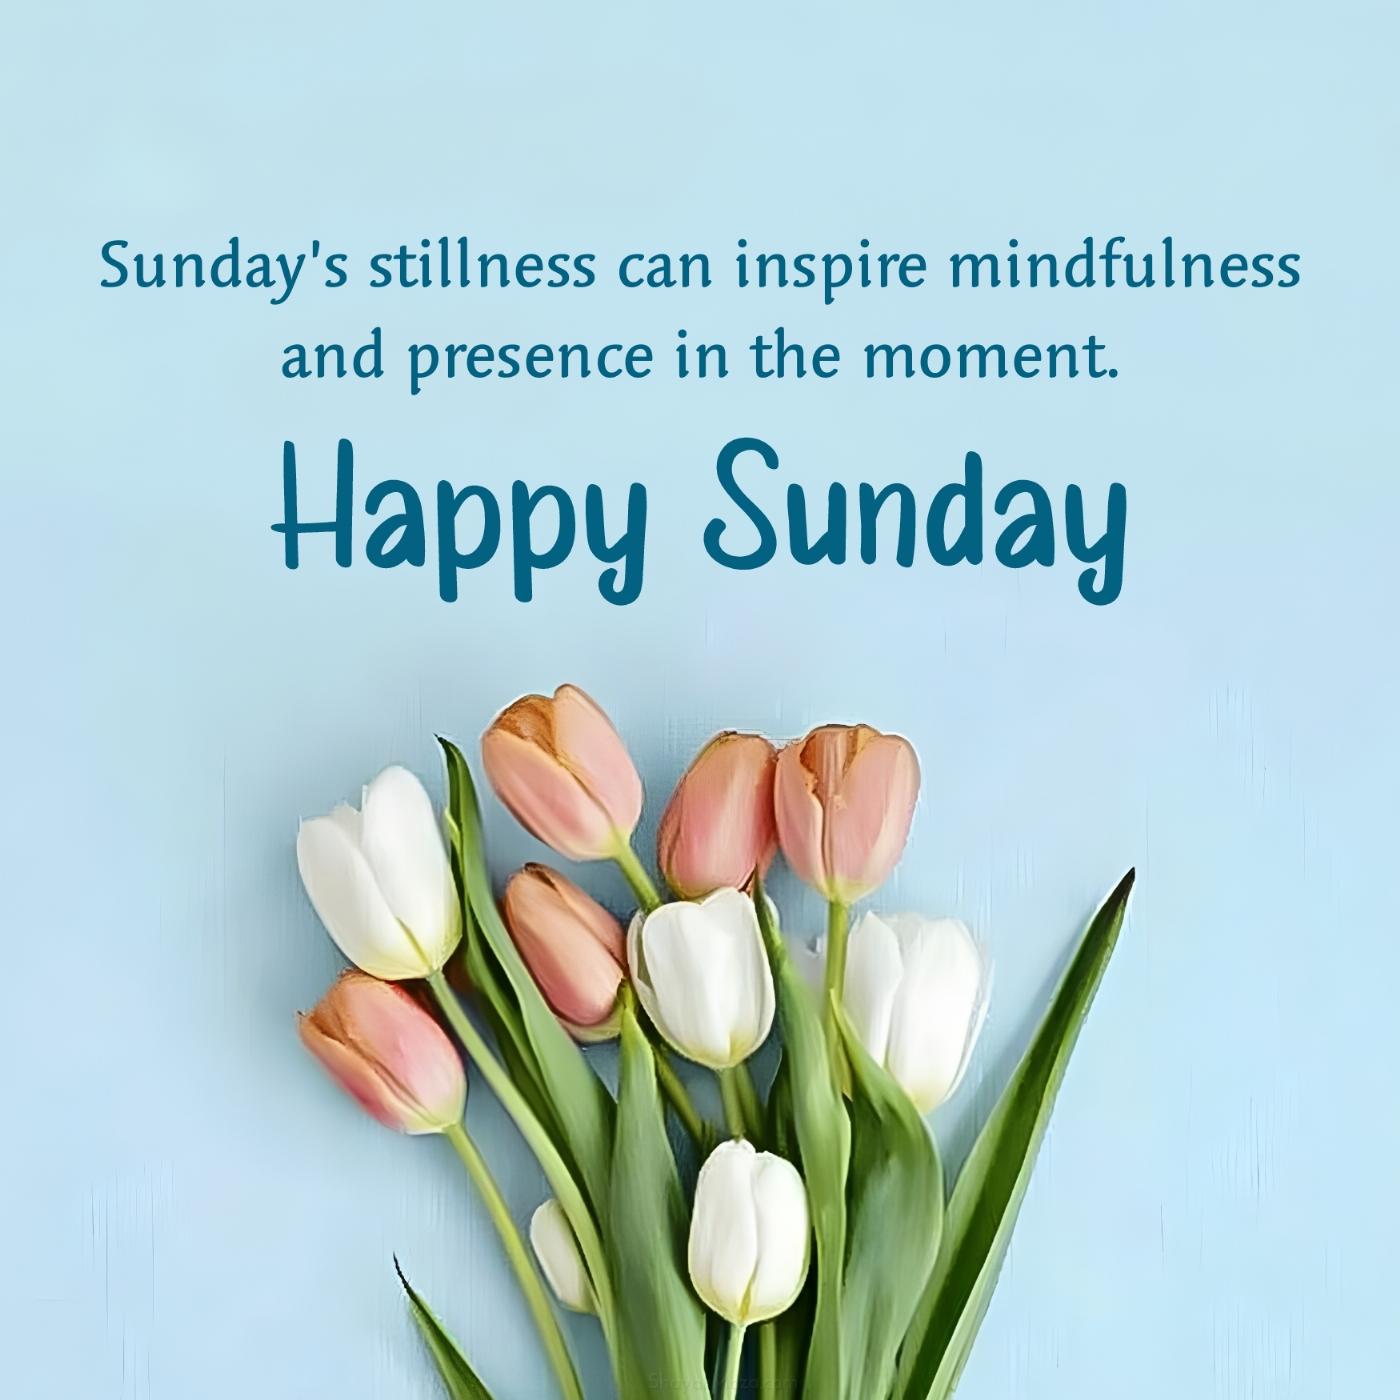 Sundays stillness can inspire mindfulness and presence in the moment